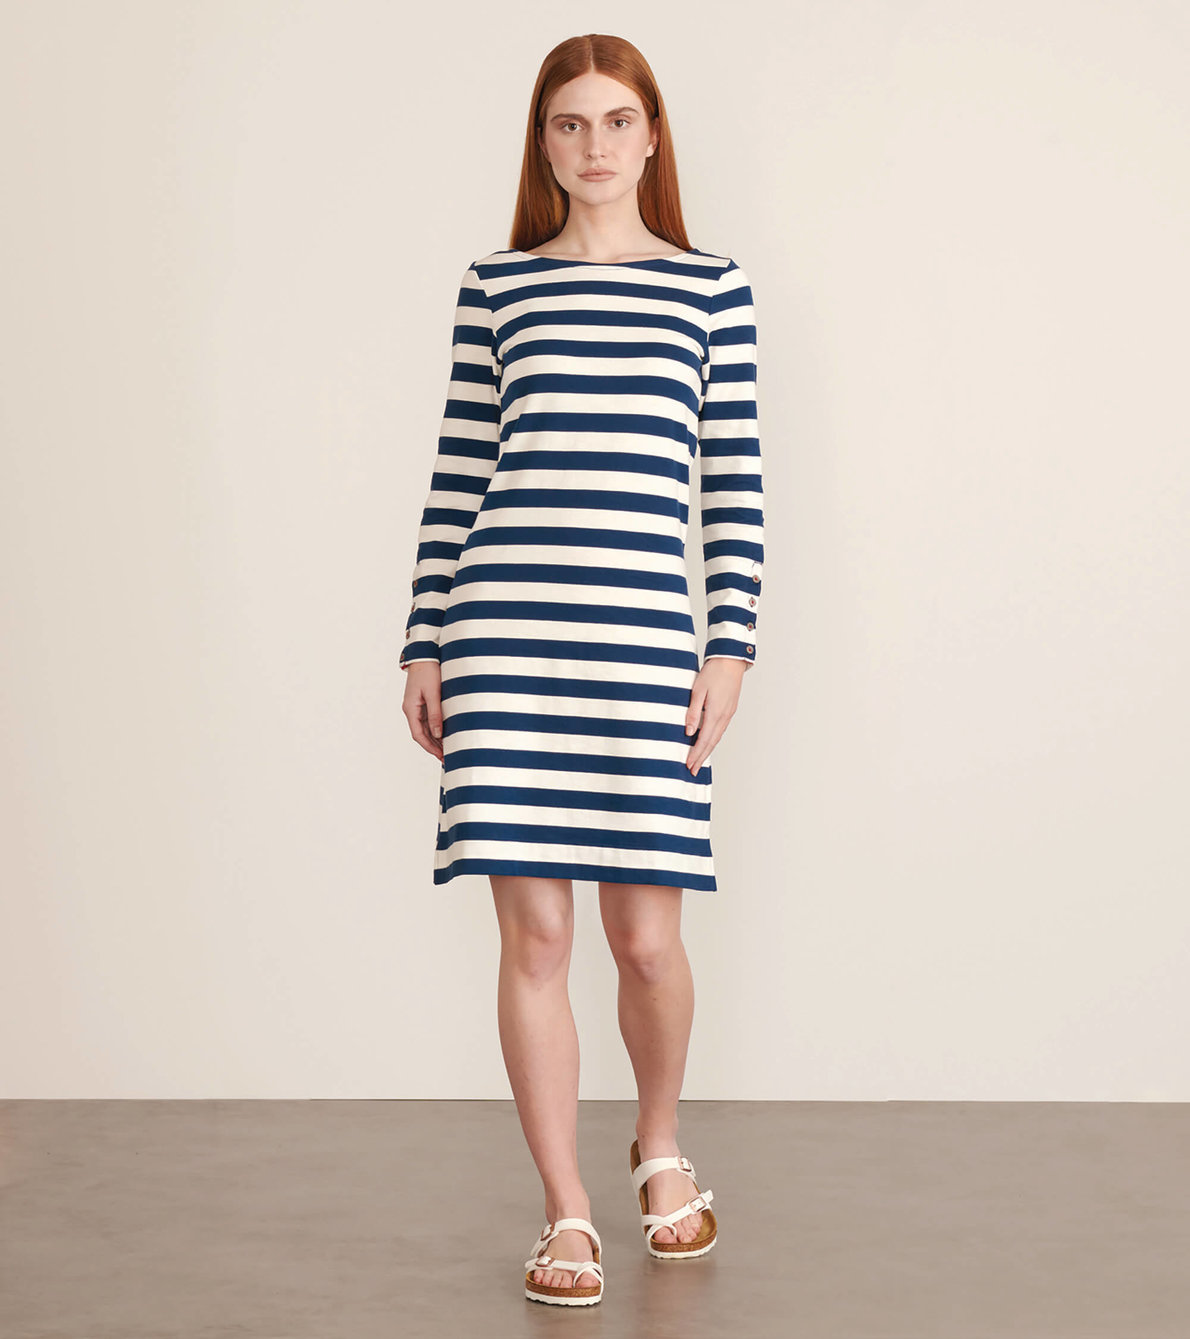 View larger image of Zoe Dress - Copen Navy Stripes